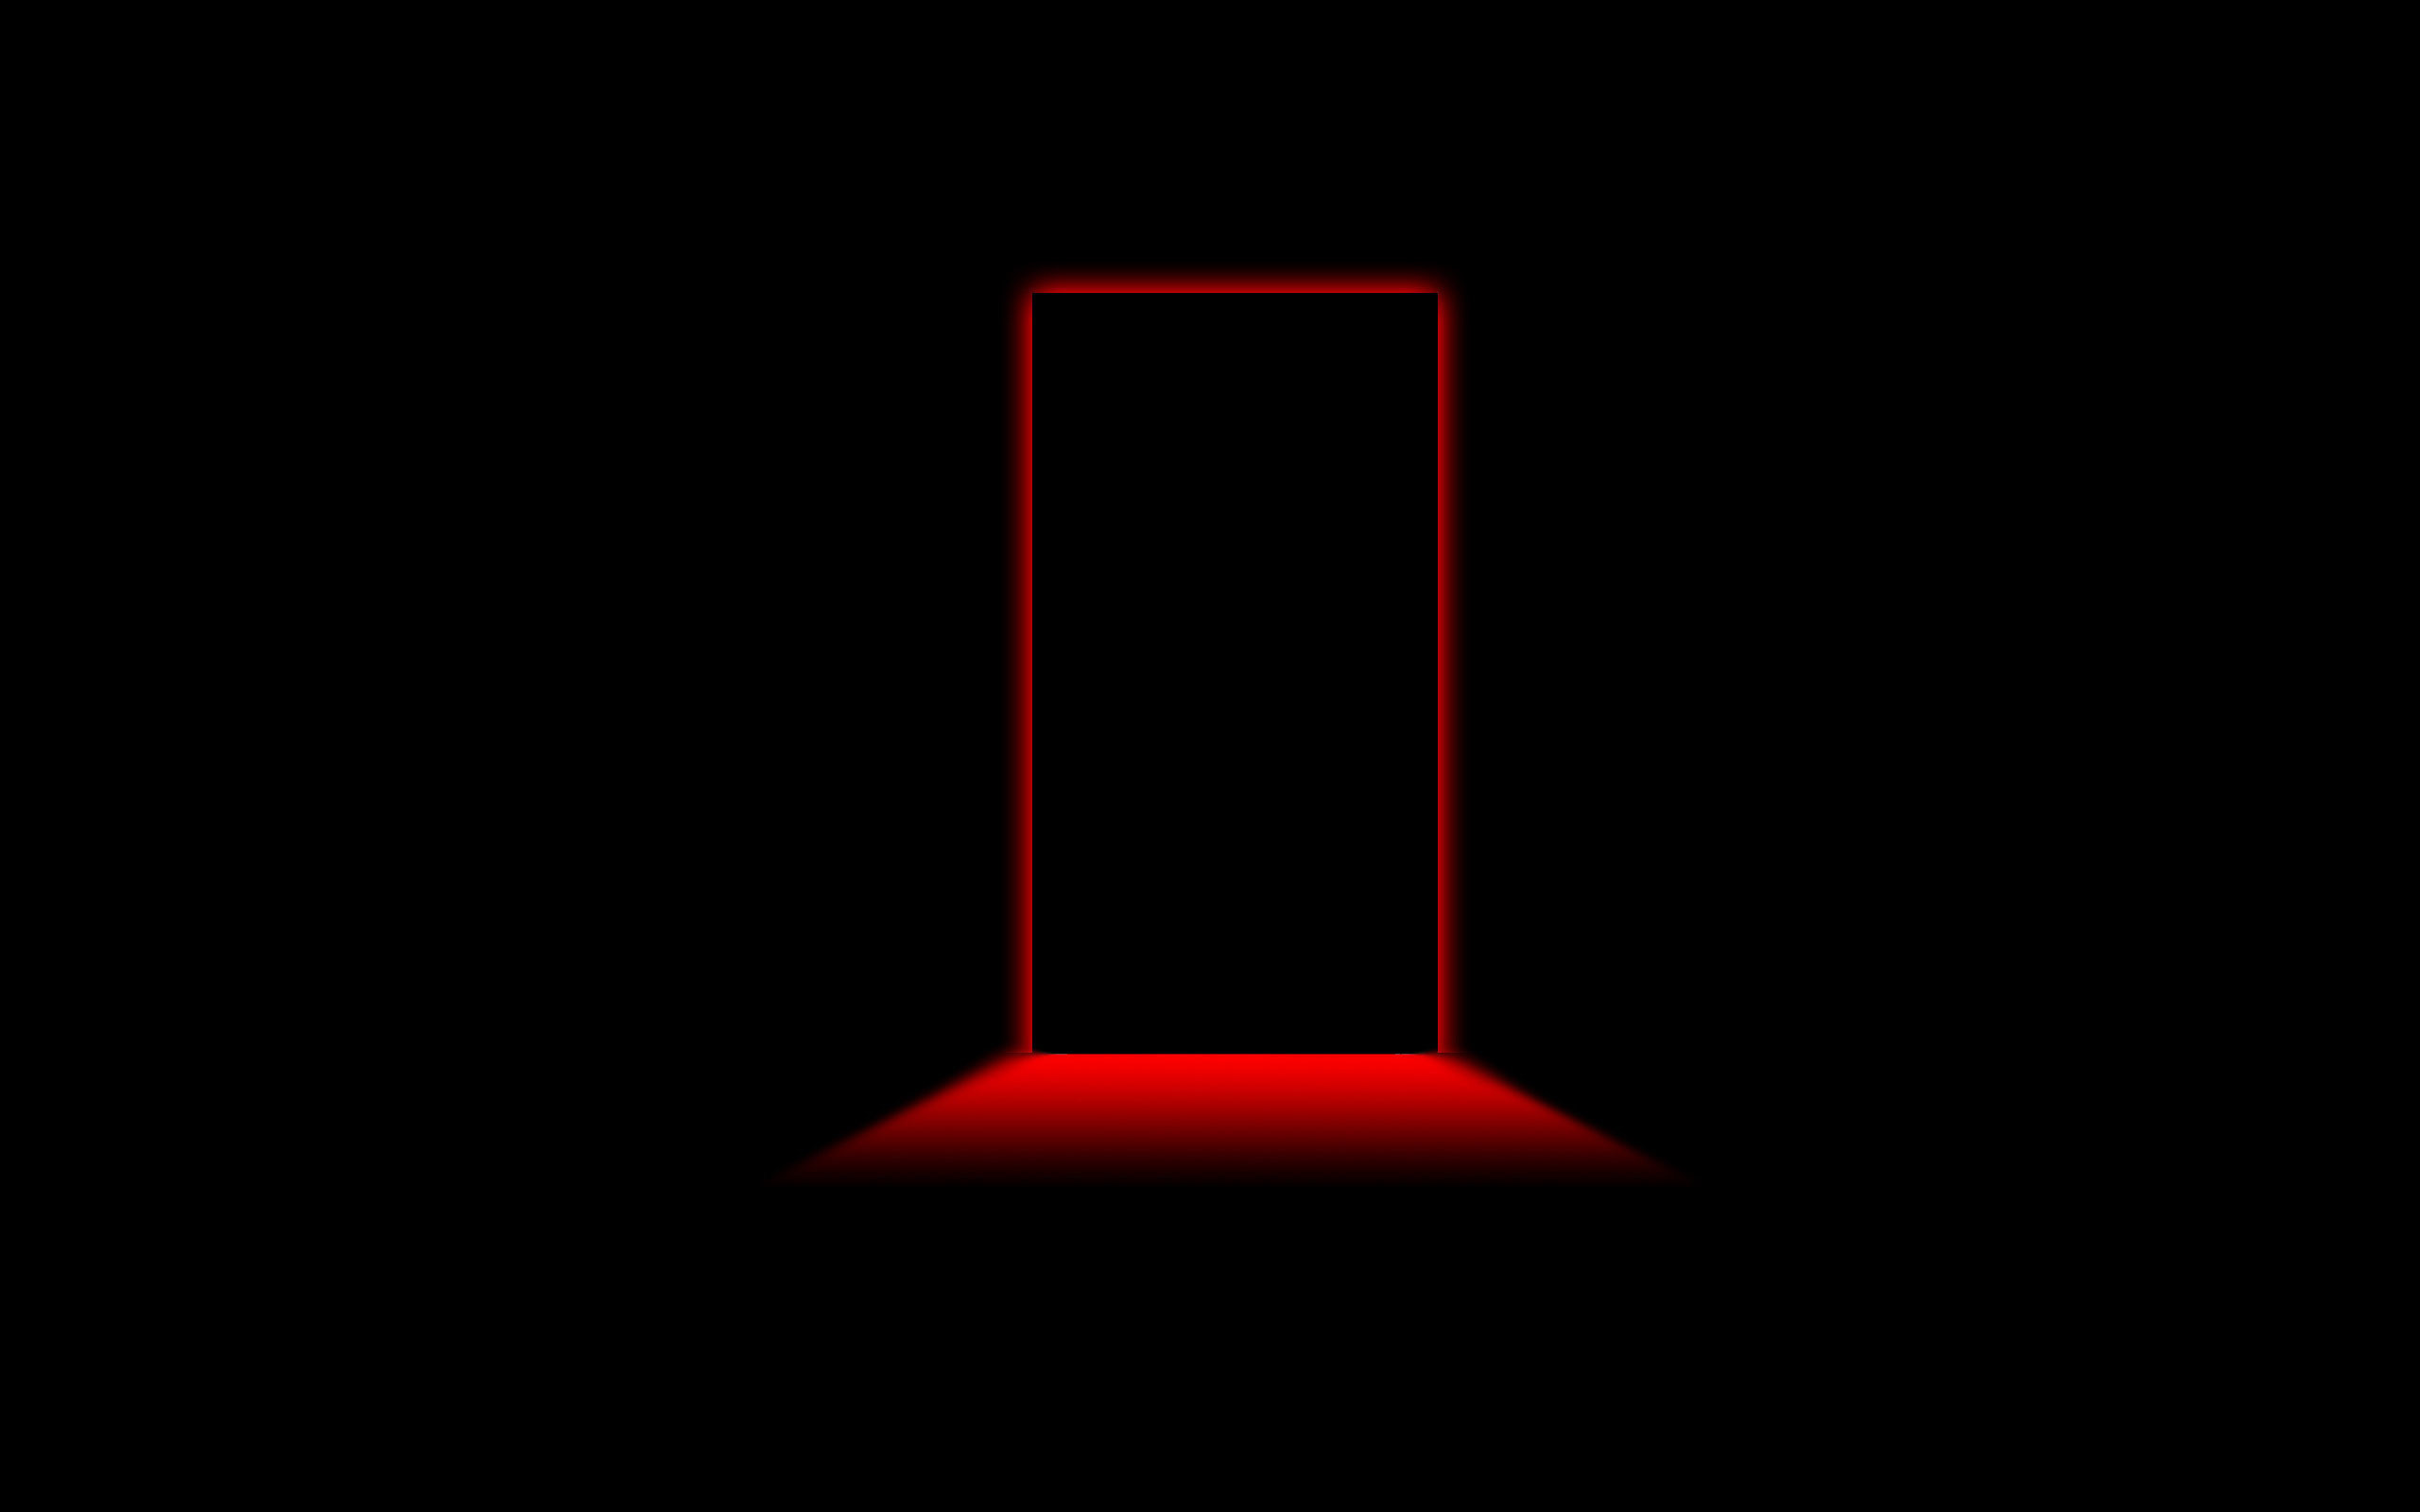 2560x1600 Image for Black Red Wallpapers HD Dekstop 7062 Backgrounds